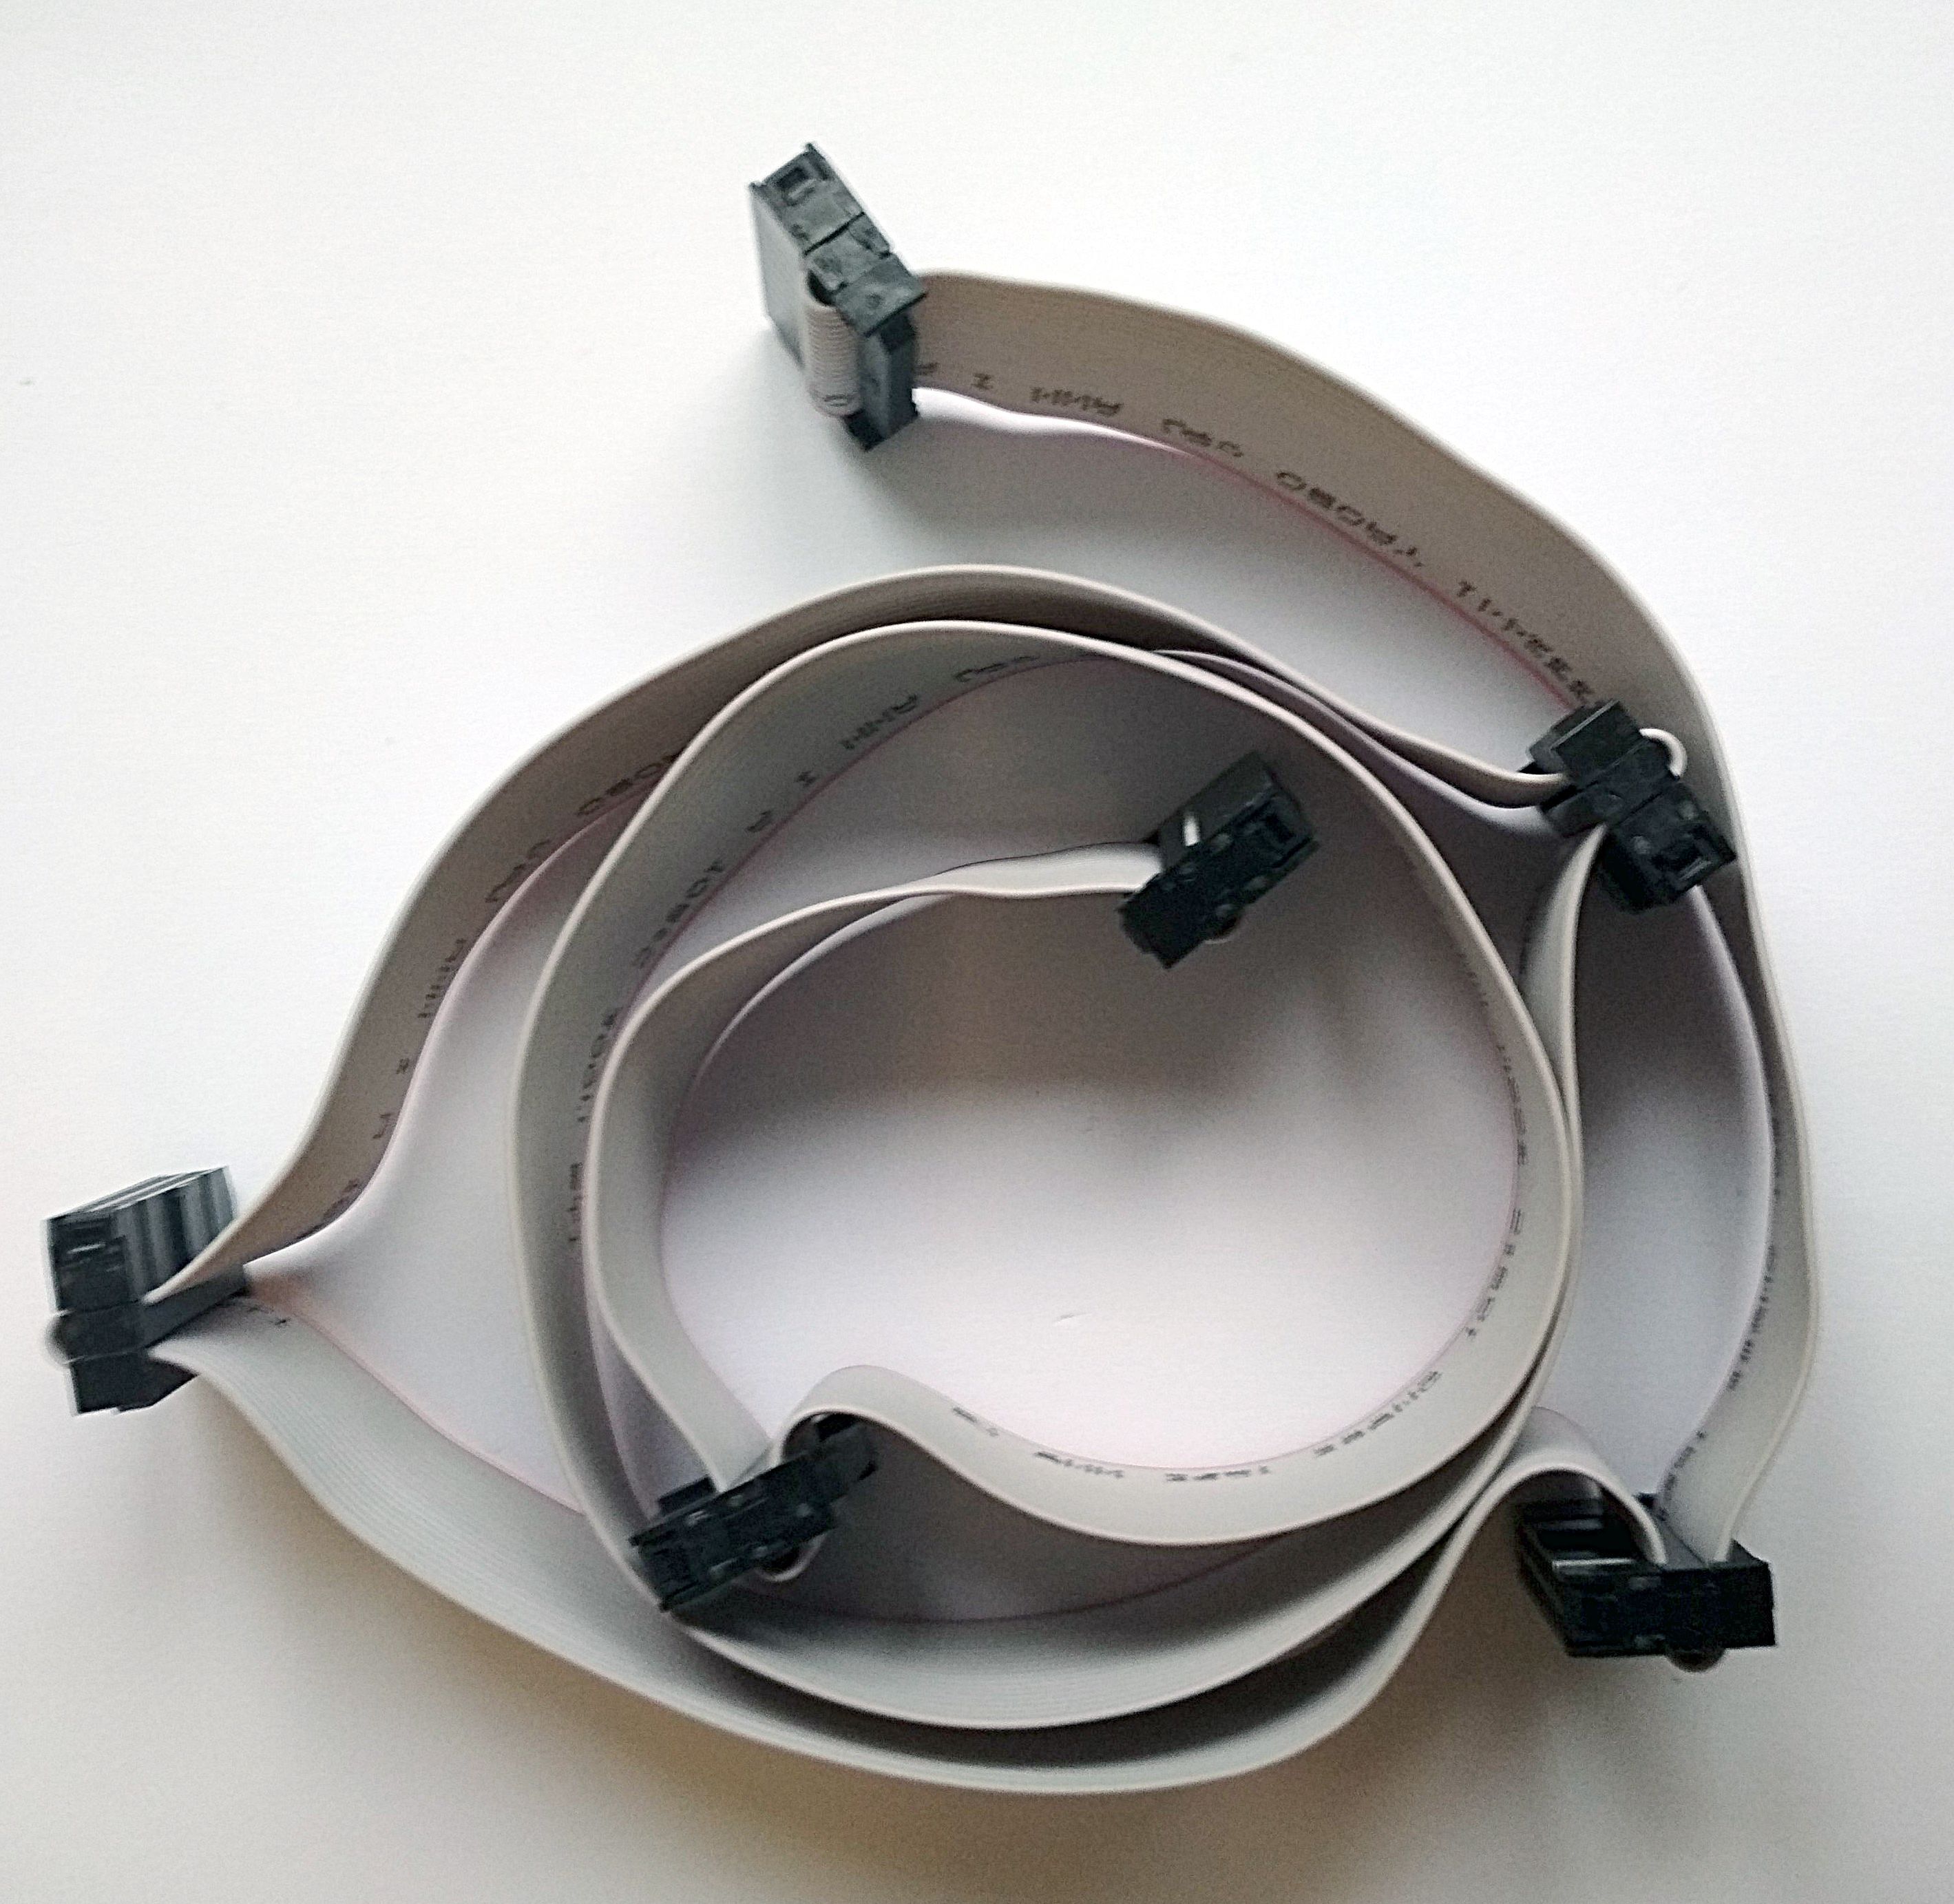 IR relay extension cable